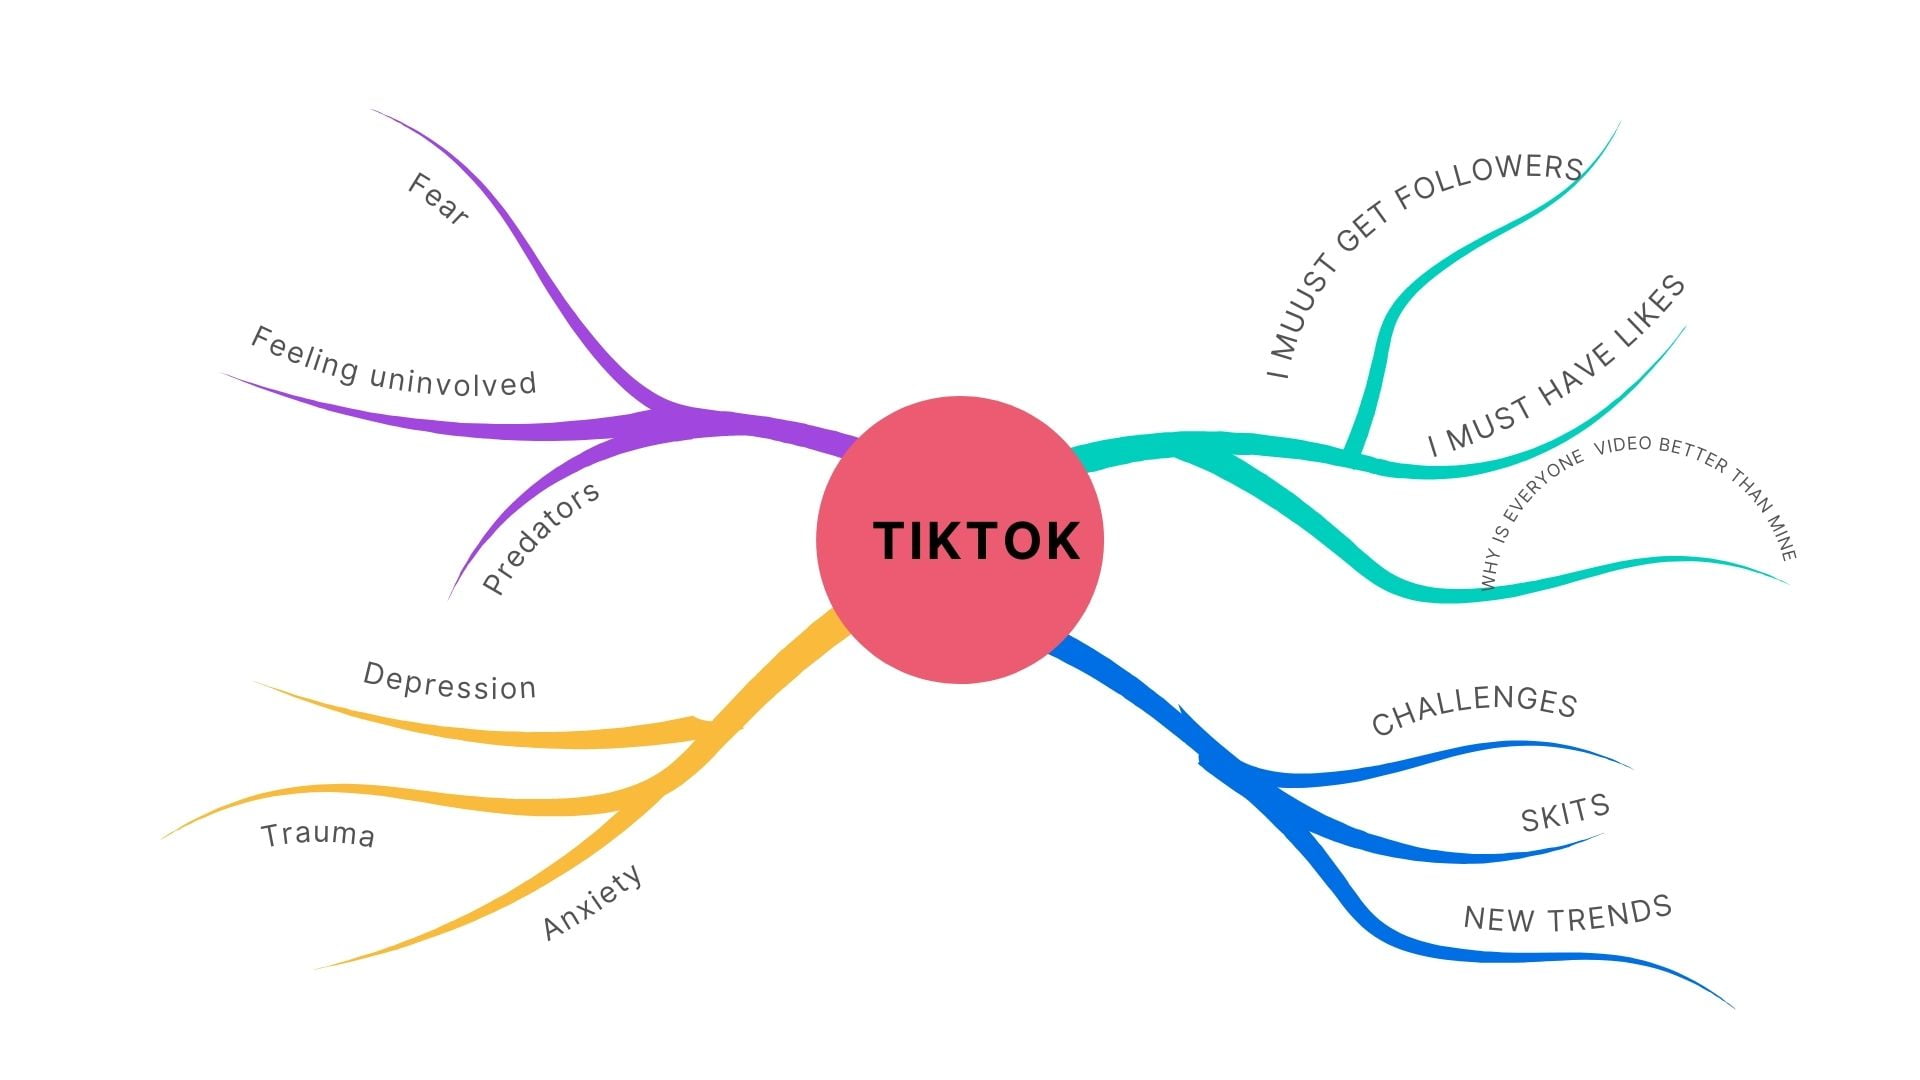 Best List Of Pros and Cons of Tiktok on Mental Health 2022